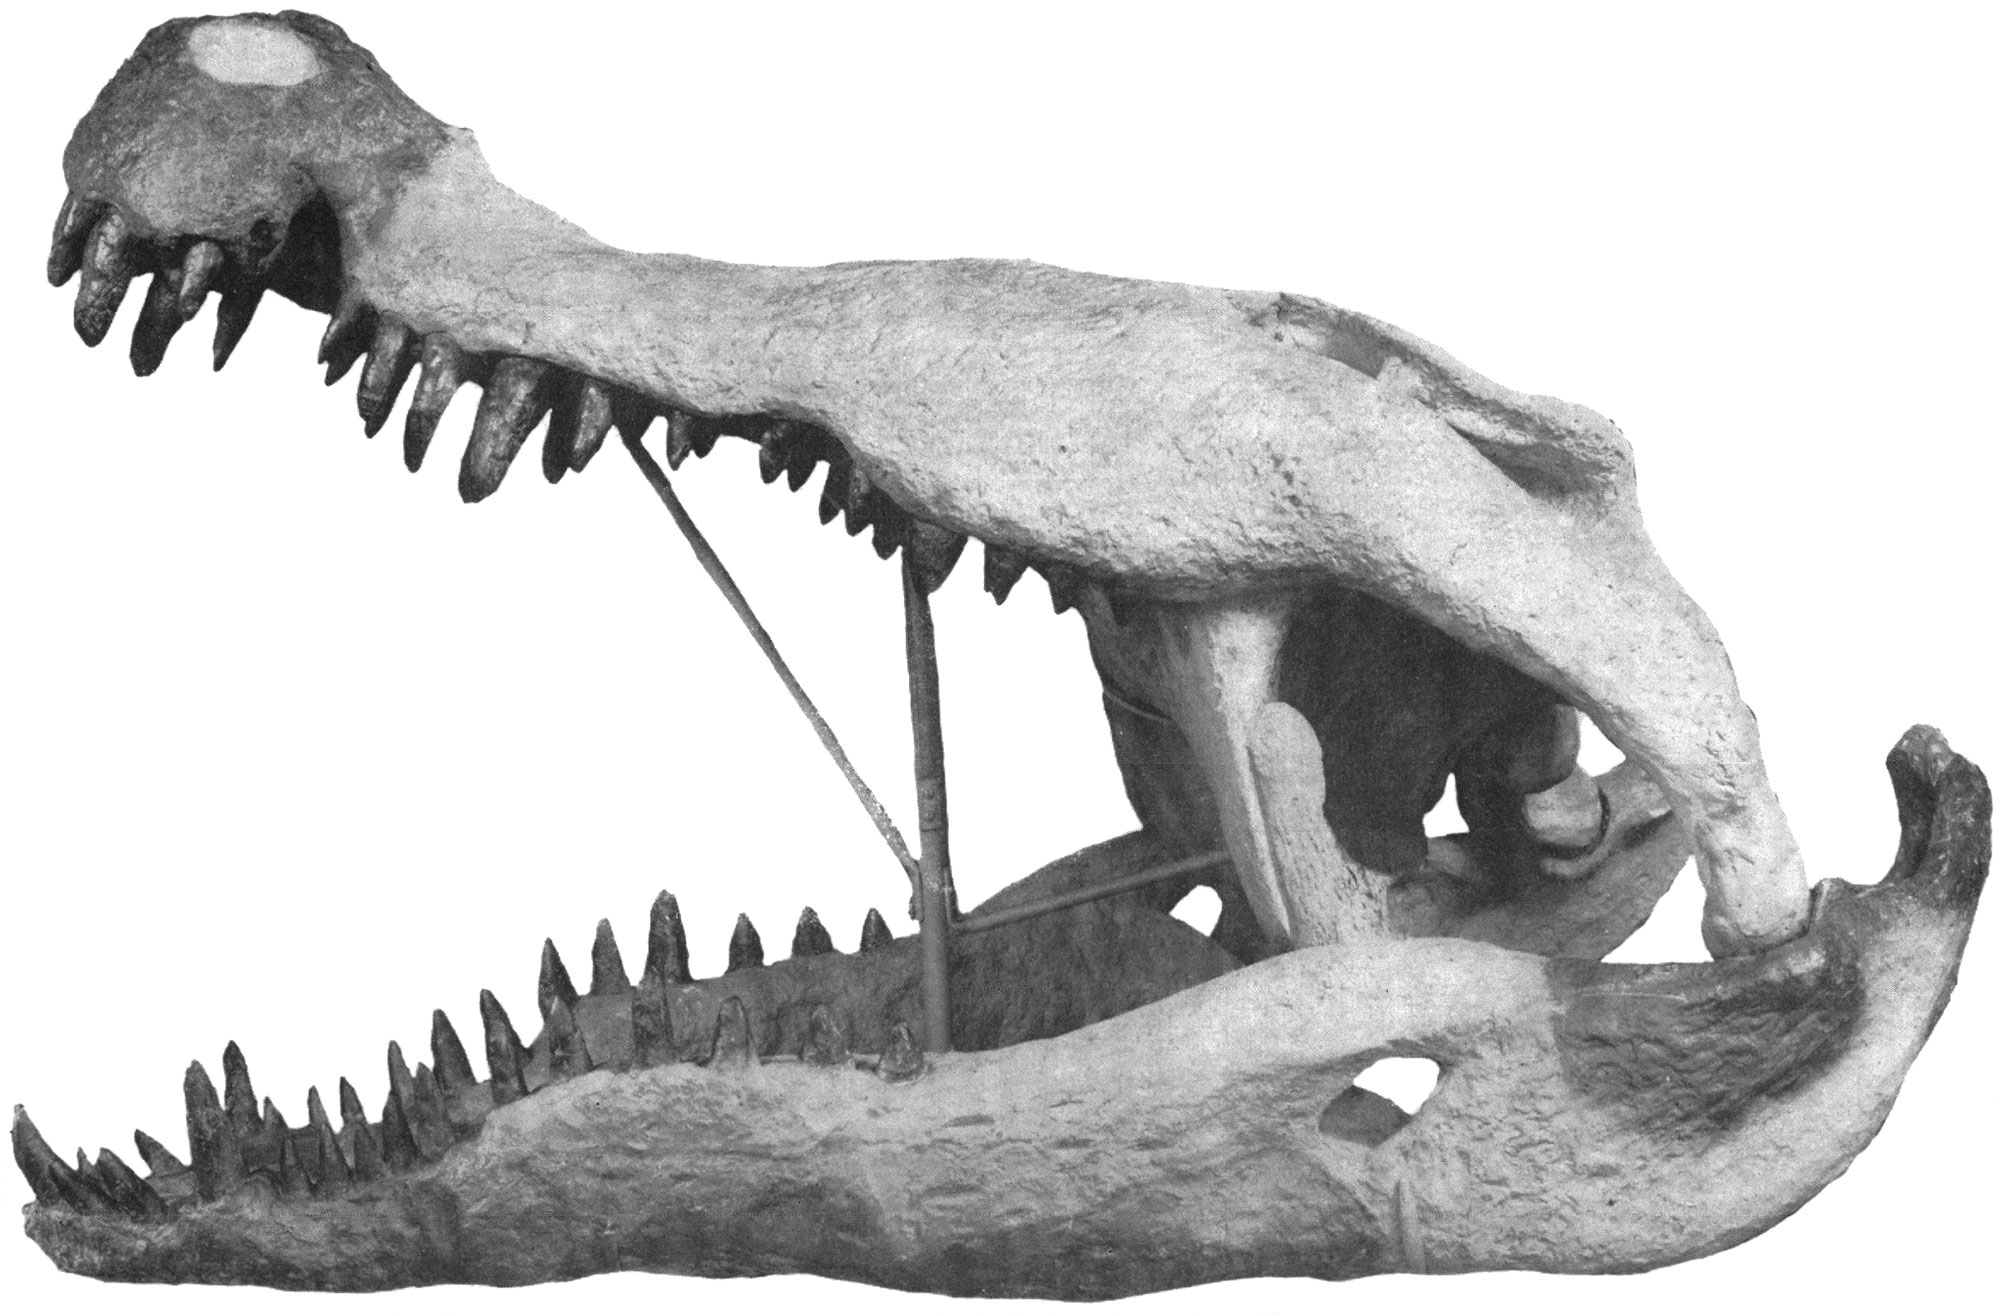 Black-and-white photo of the skull of Deinosuchus, a large crocodilian. The skulll is mounted with a bar to hold the jaws open.